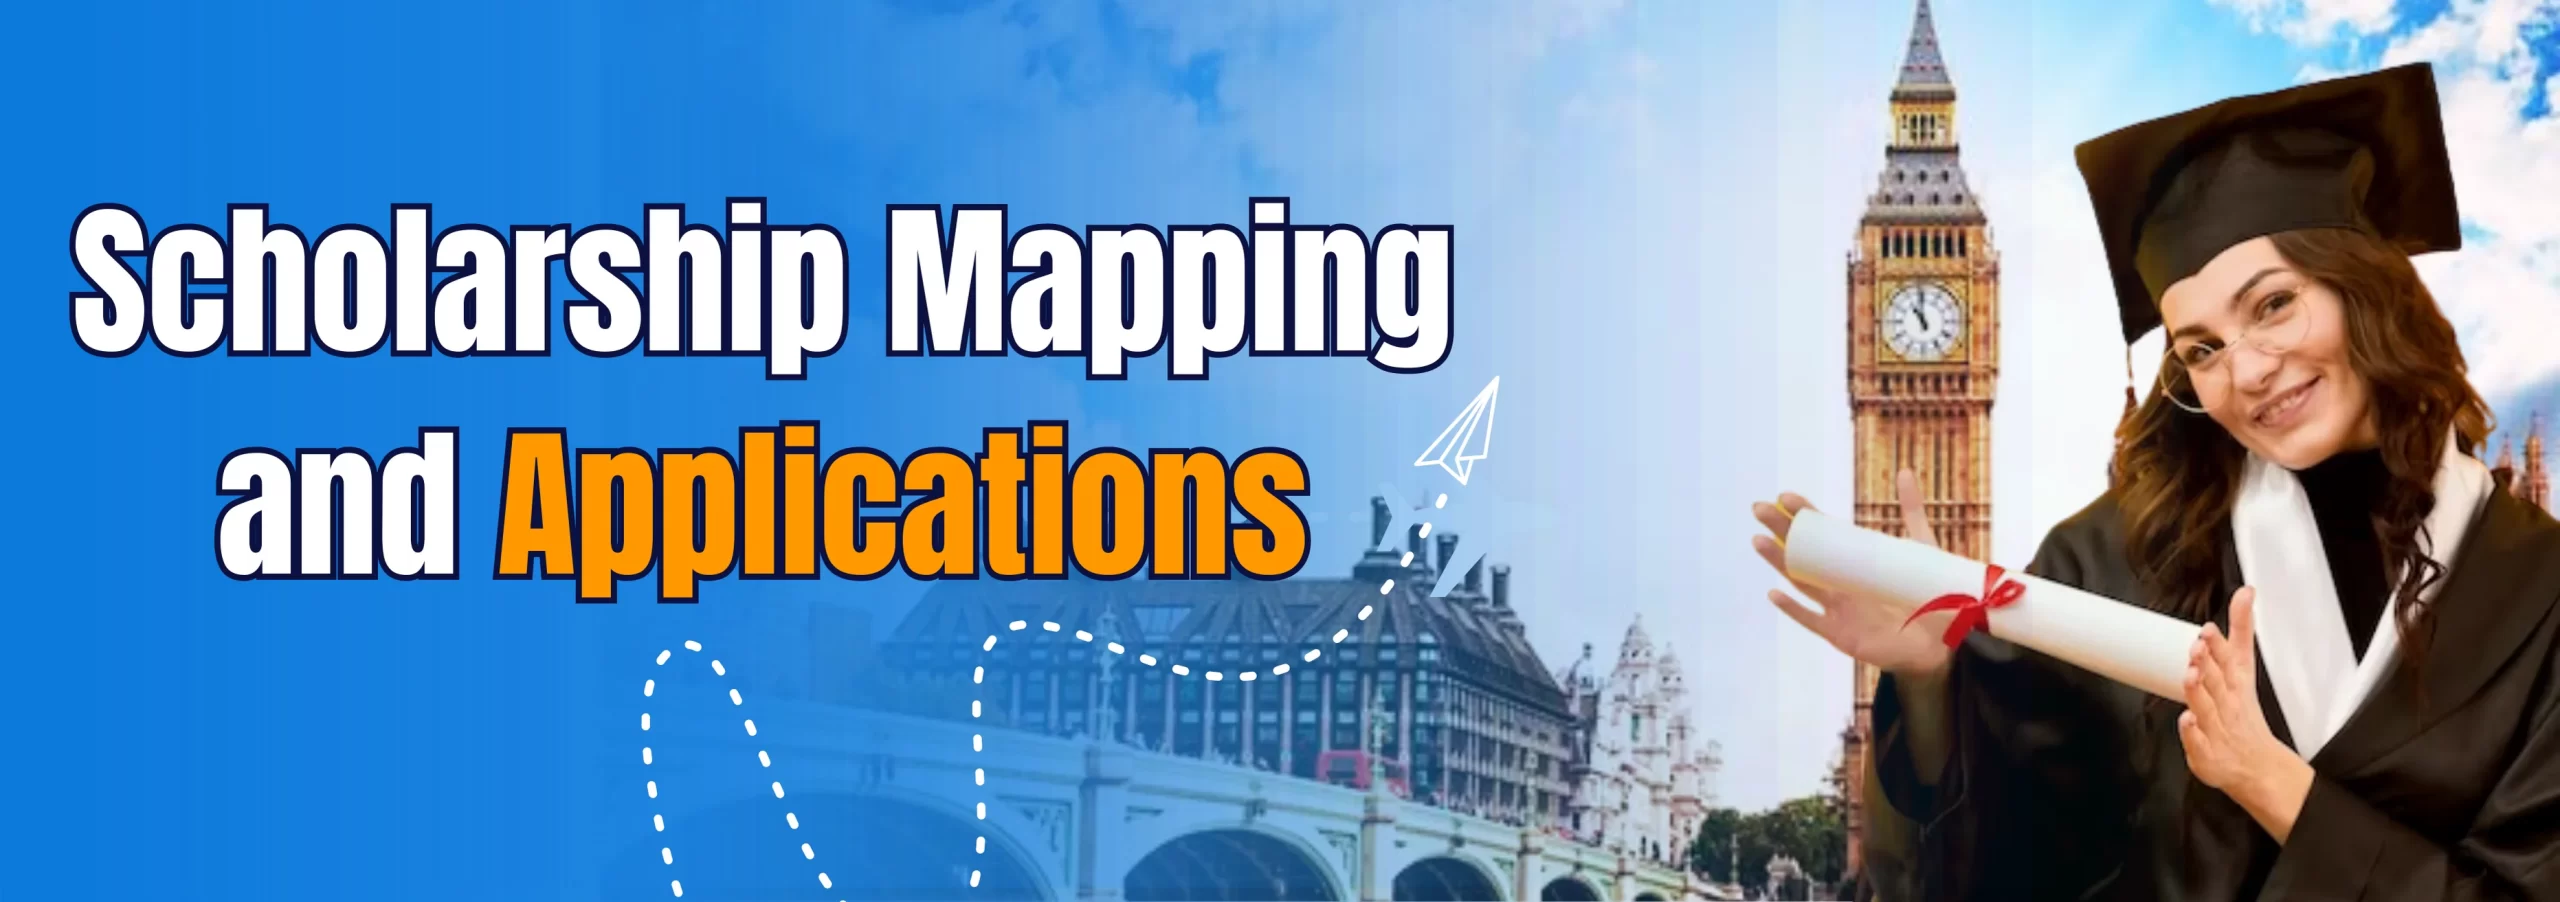 Scholarship Mapping and Applications by EduLaunchers